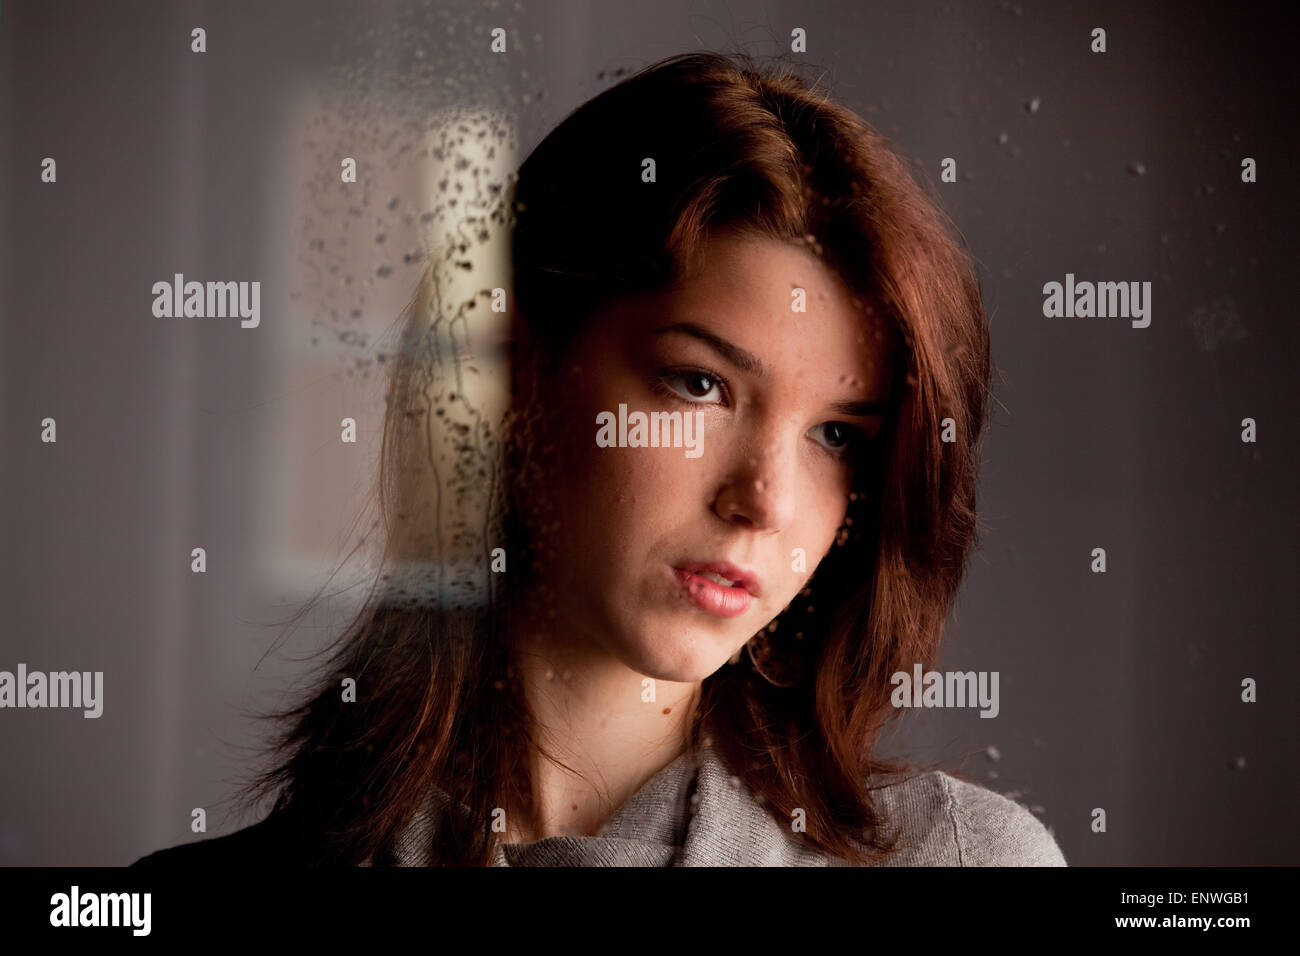 Young woman looking sadly through window glass Stock Photo